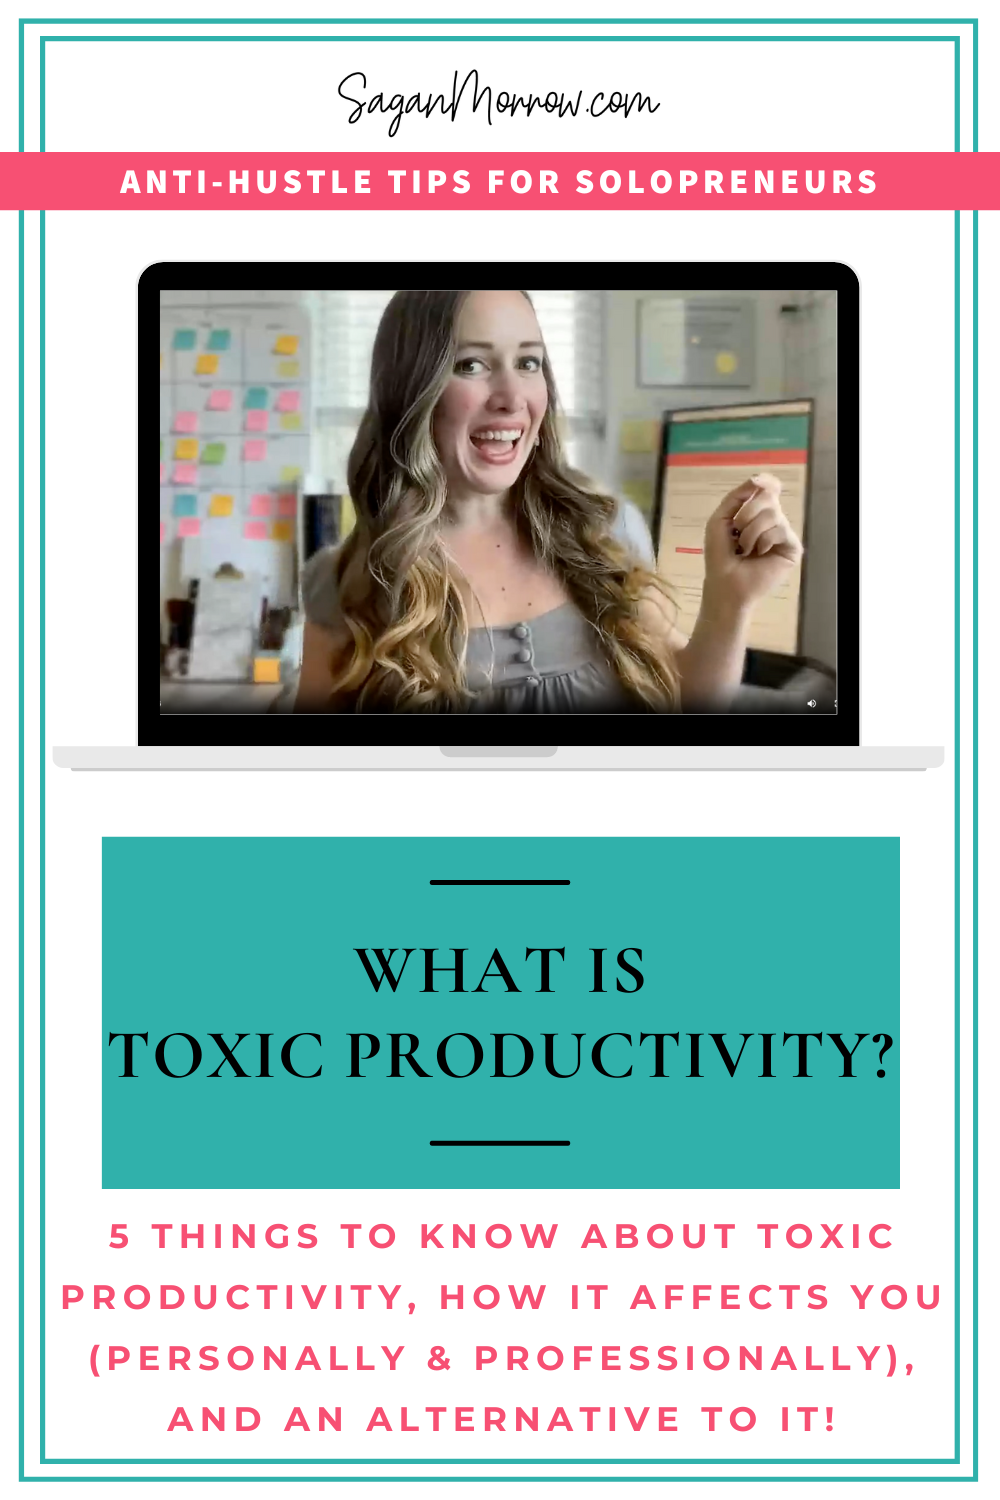 What is toxic productivity? How does toxic productivity affect you (in both your personal life and your professional life!), AND what is an alternative to toxic productivity? 